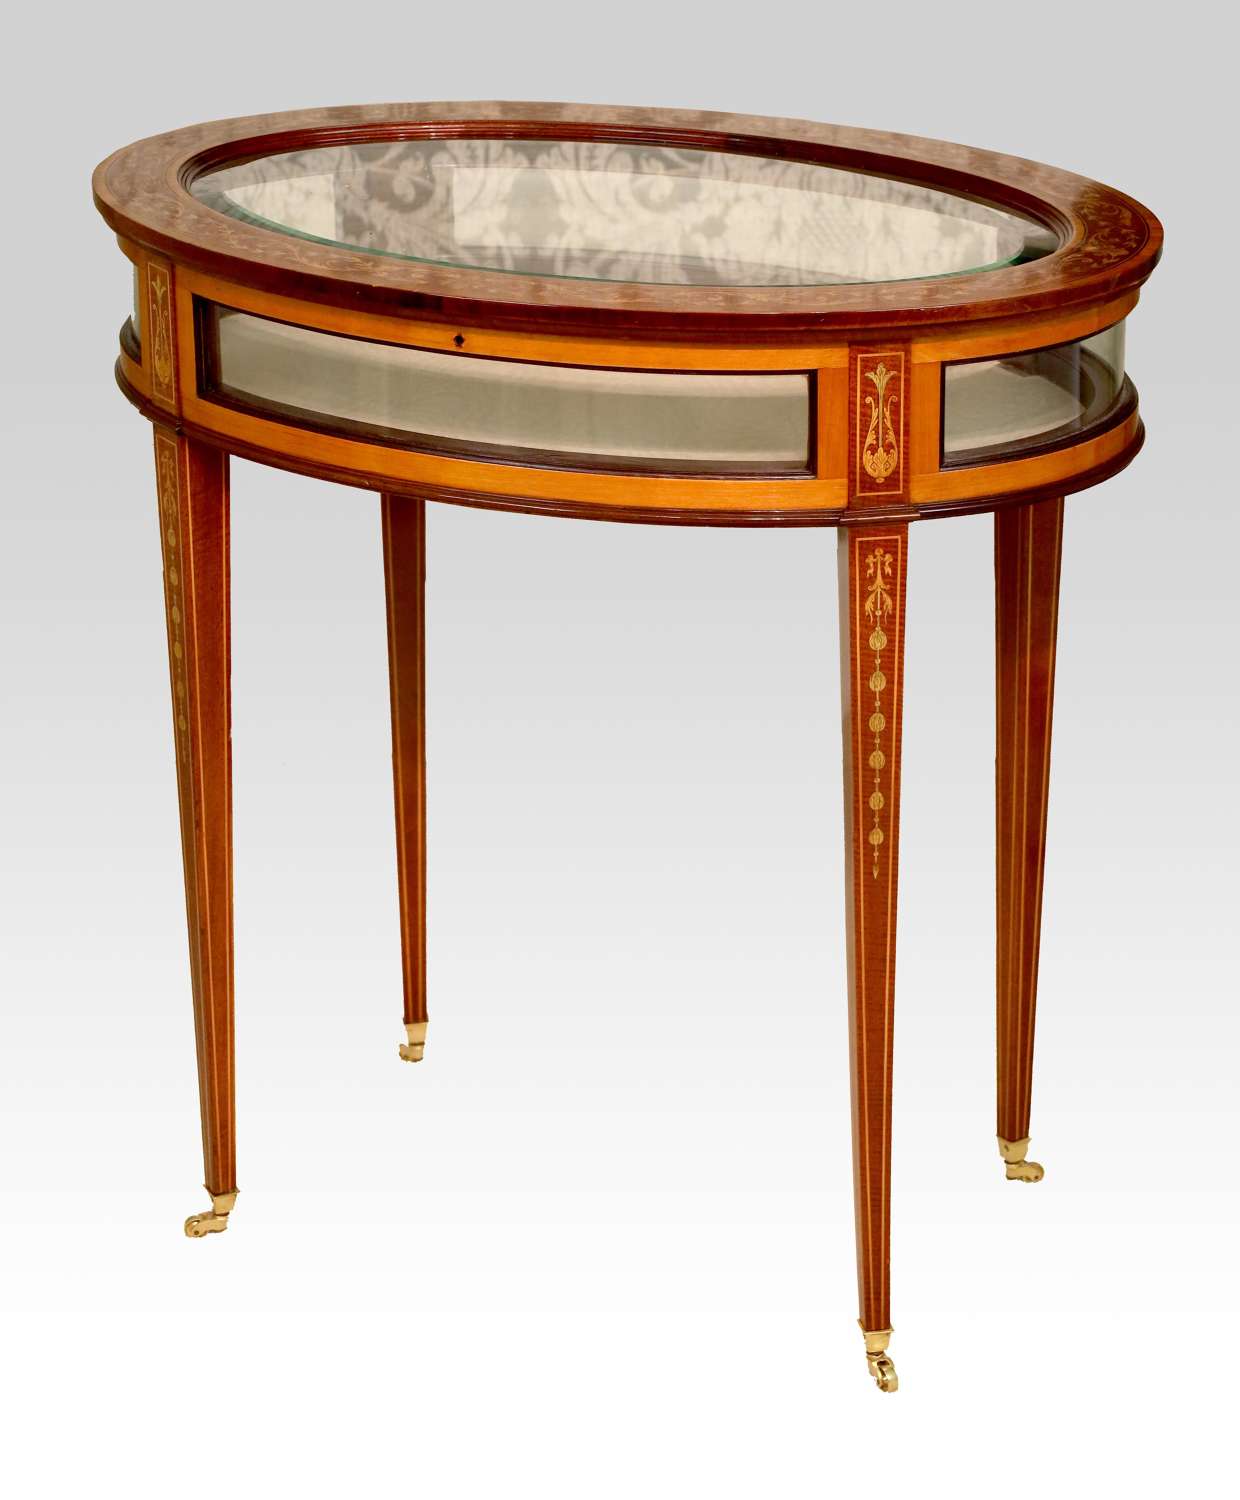 An Edwards & Roberts Victorian Mahogany Inlaid Oval Bijouterie Table